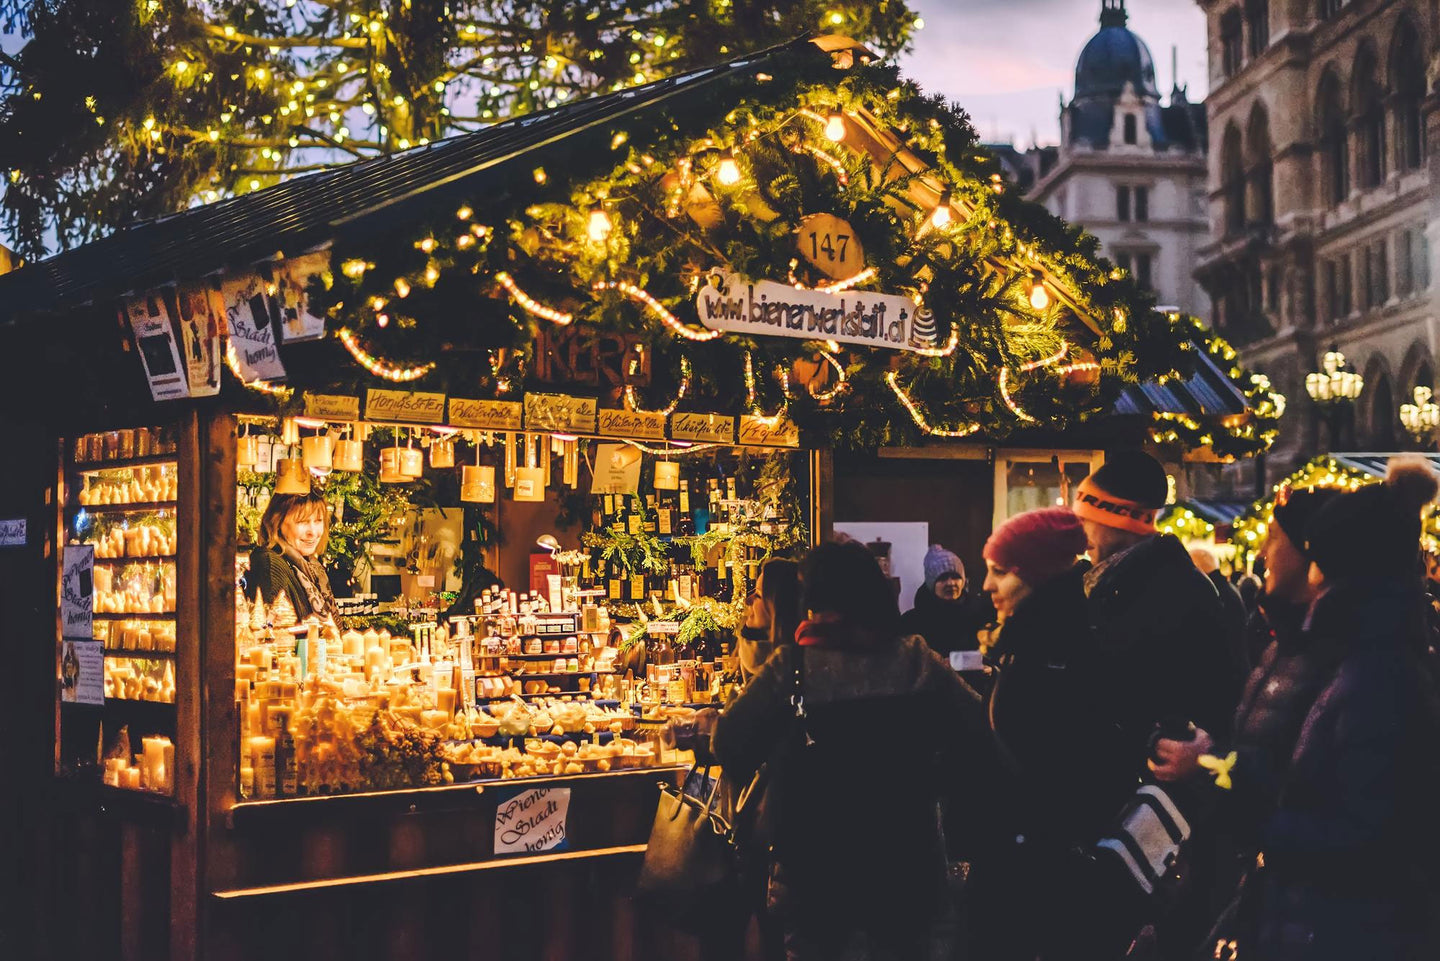 From Bavaria to Bath: Your Guide to European Christmas Markets